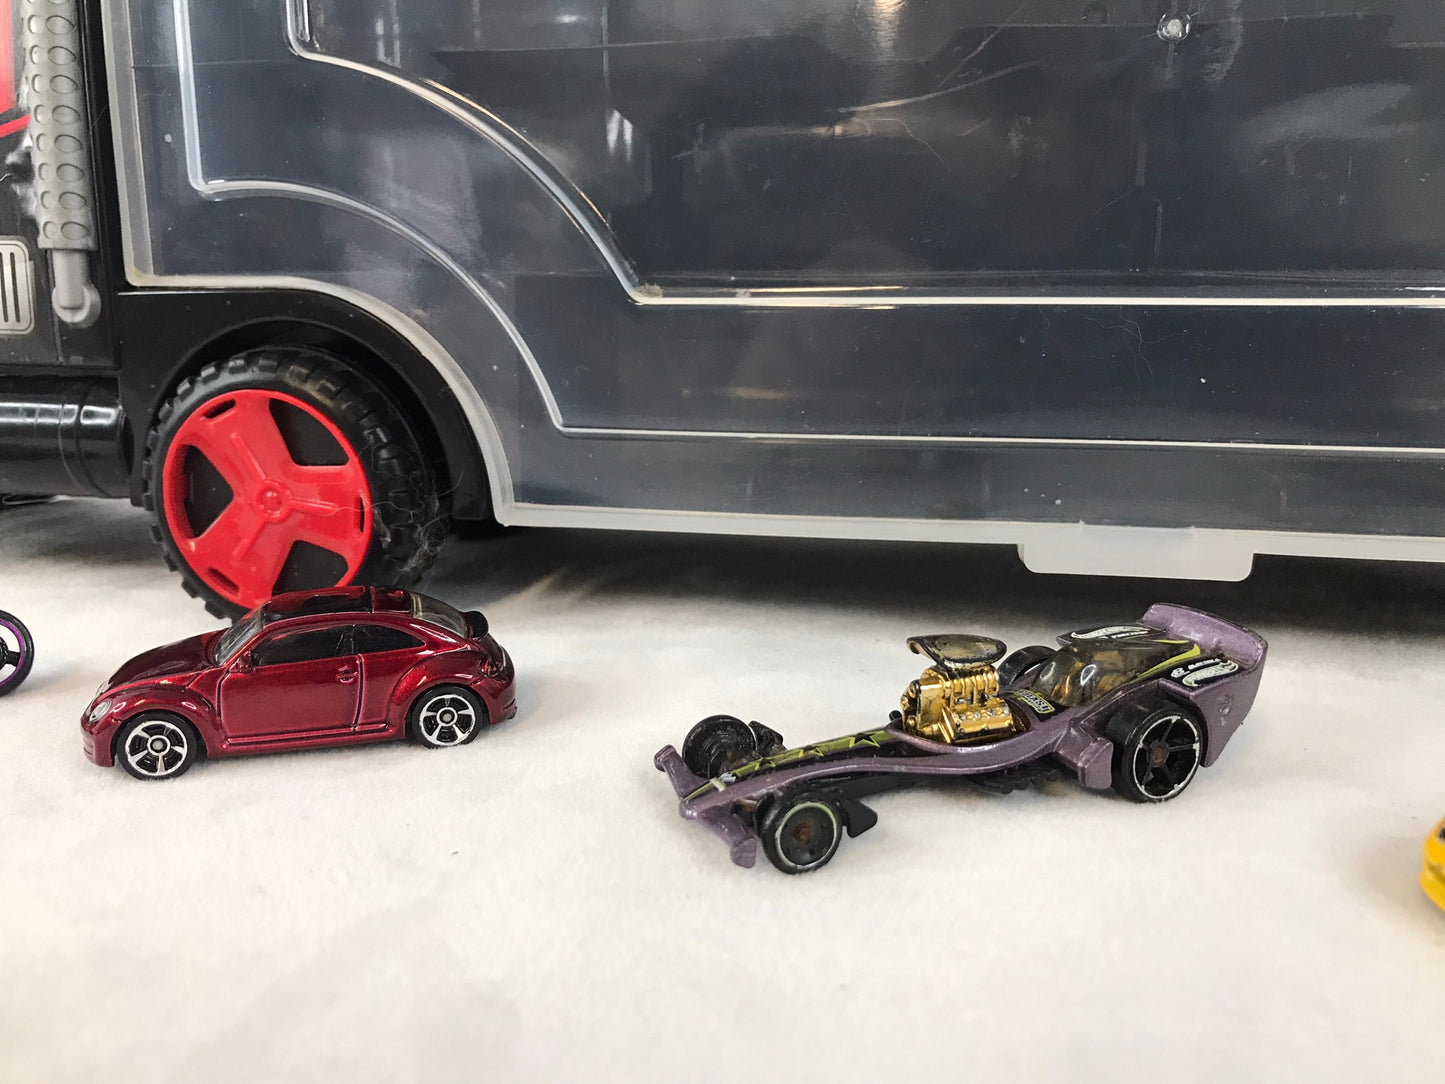 Hot Wheels and Die Cast Cars With Large Car Carrier Truck